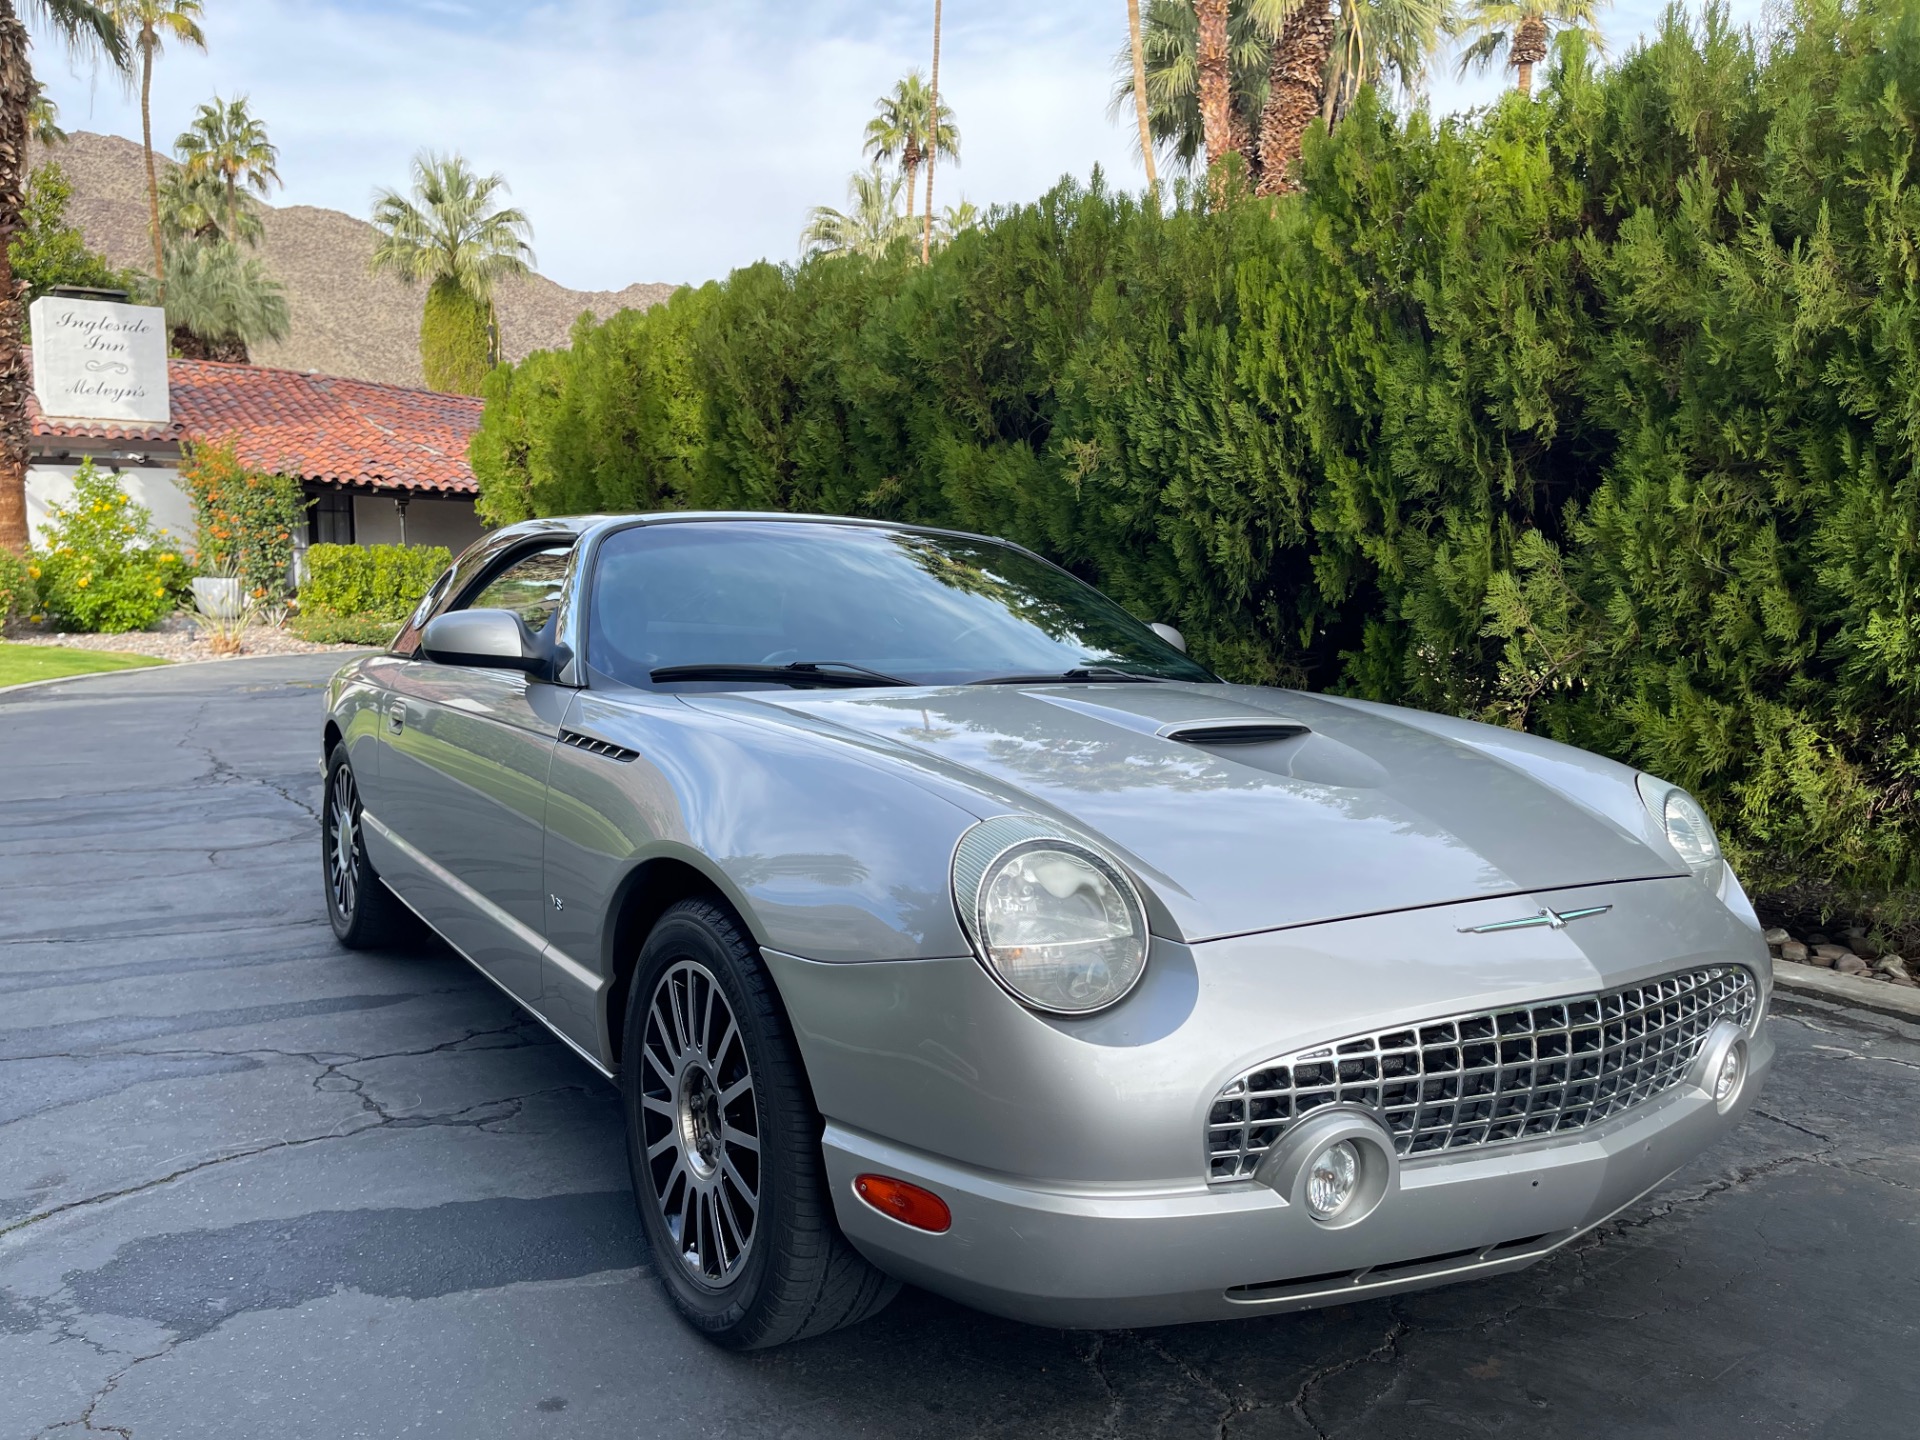 Used-2004-Ford-Thunderbird-Deluxe